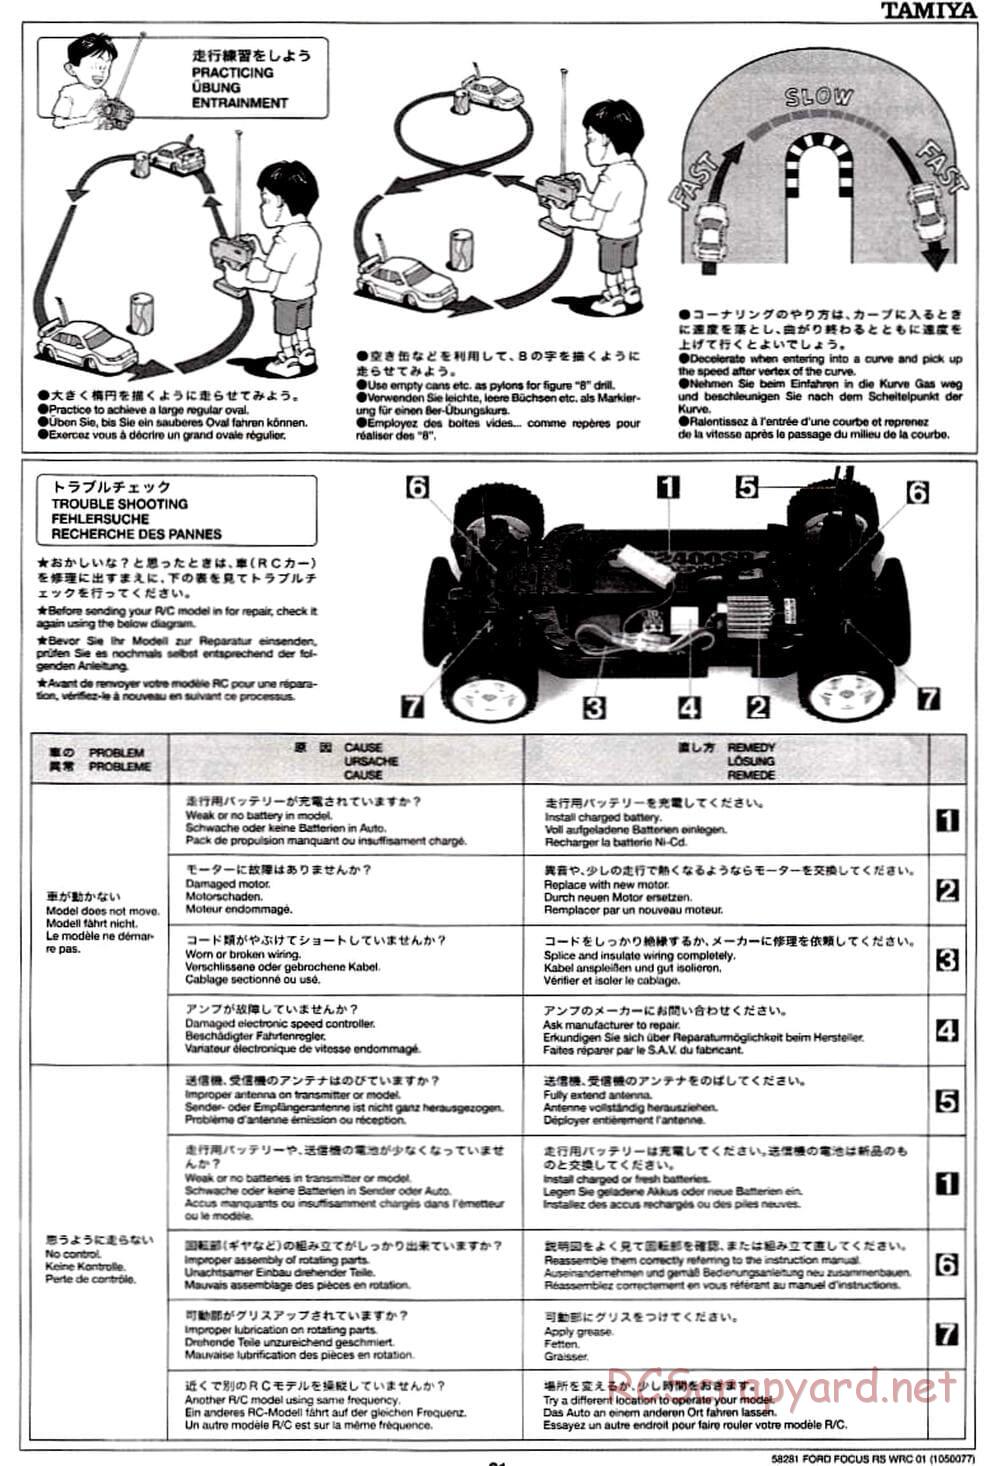 Tamiya - Ford Focus RS WRC 01 - TB-01 Chassis - Manual - Page 21